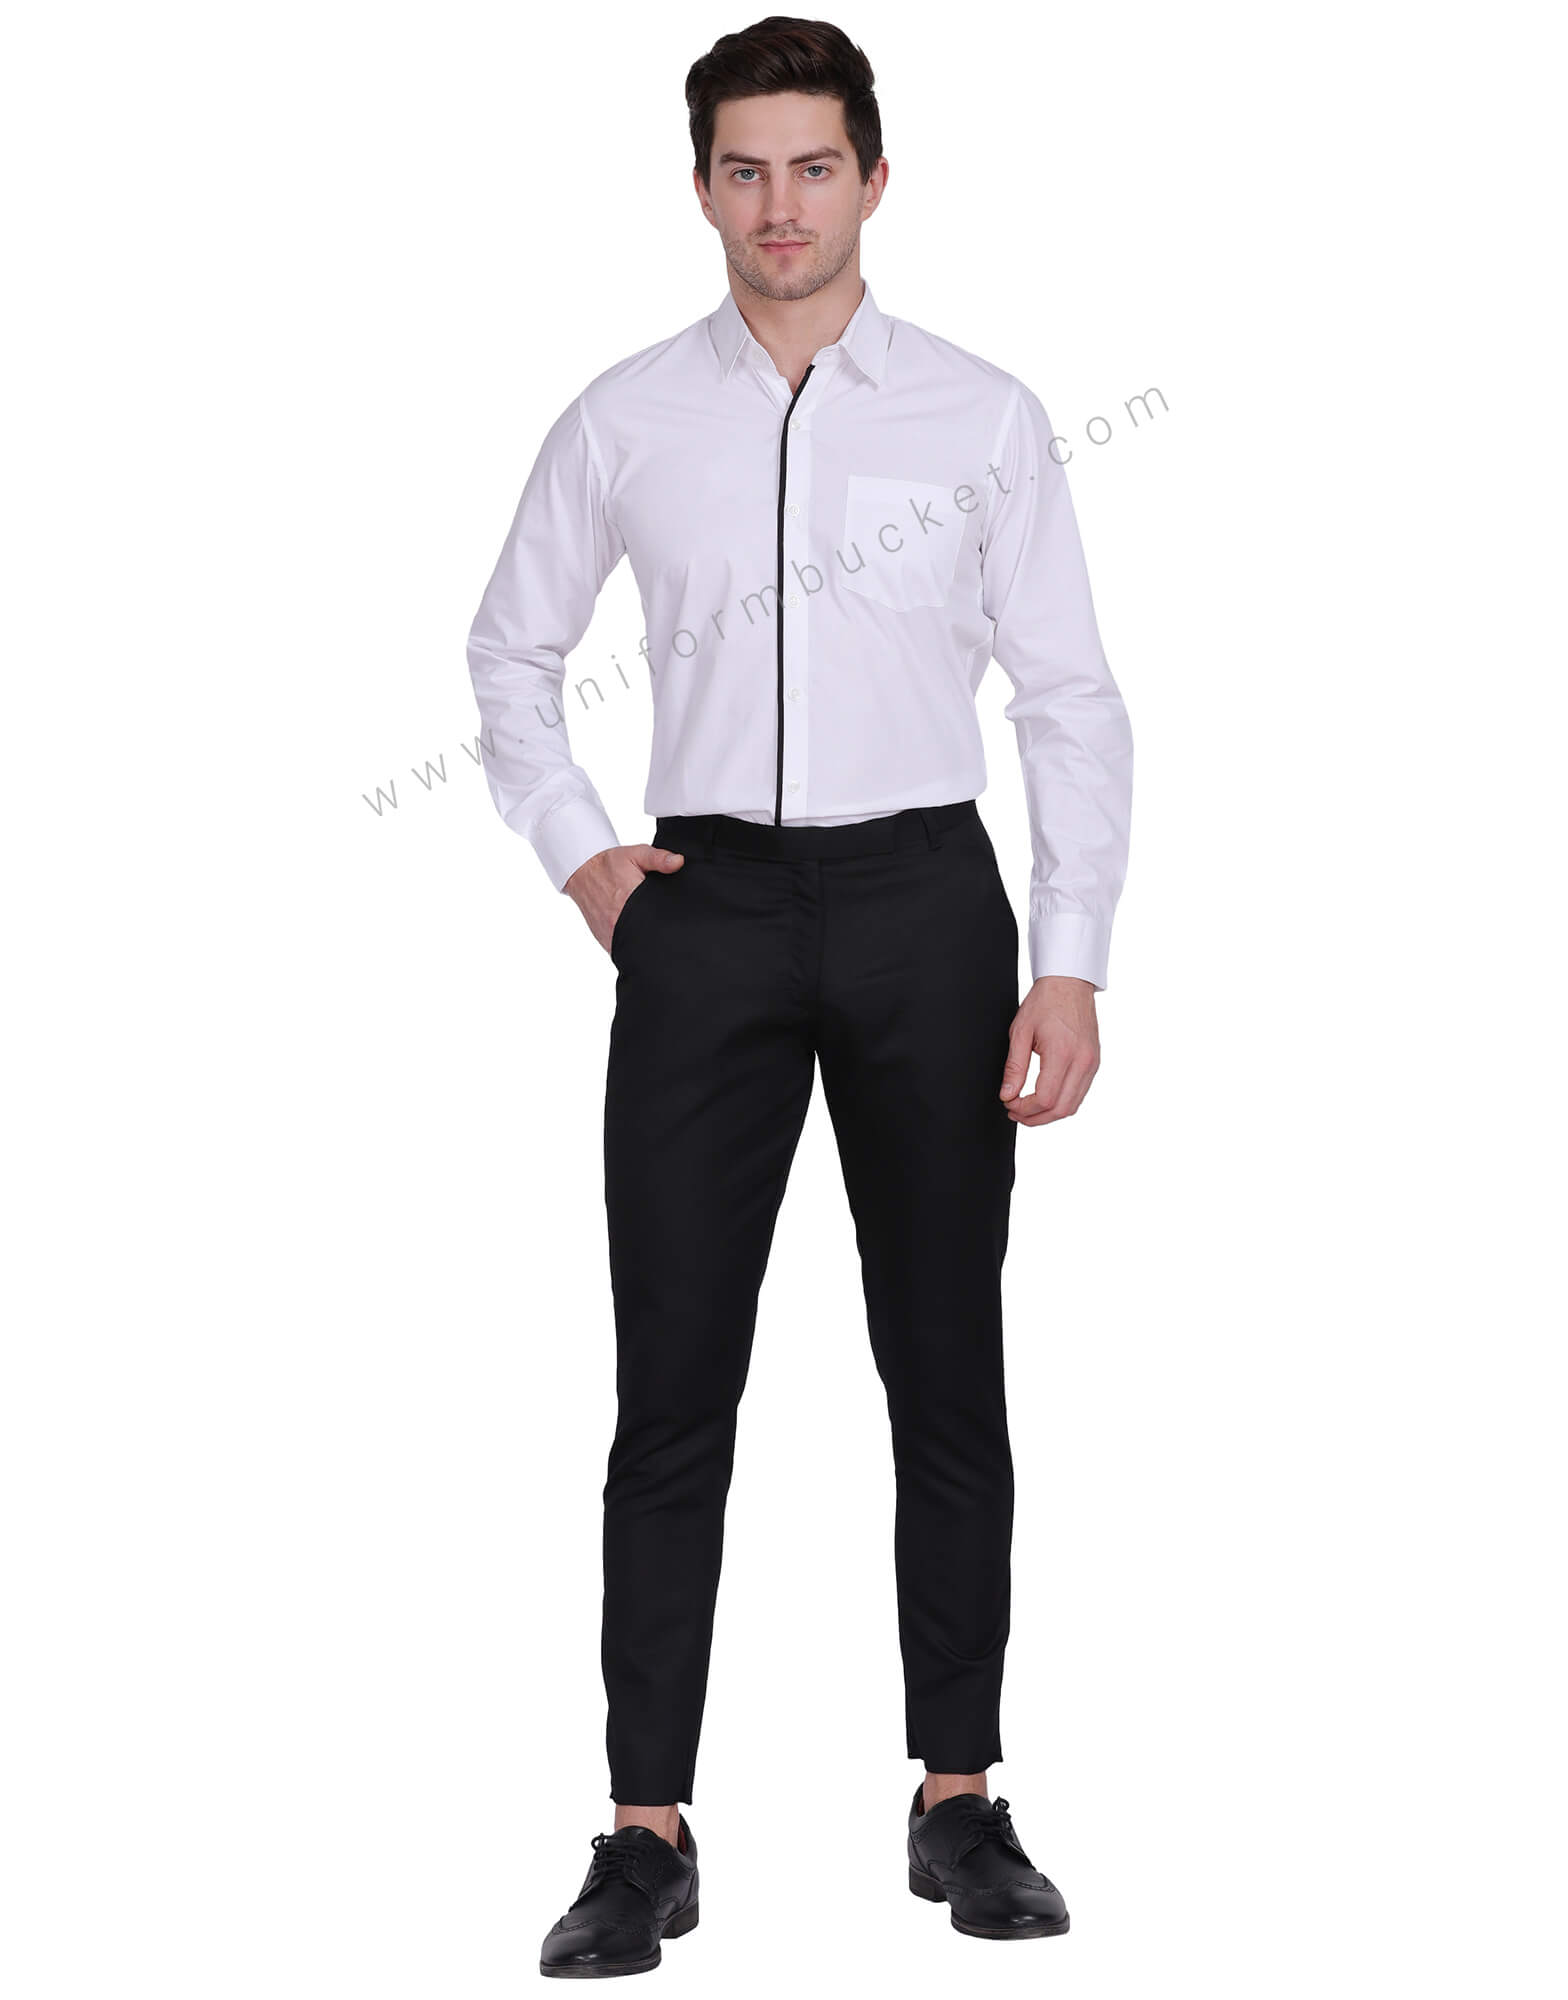 BUY MALE WHITE SHIRT WITH BLACK PIPING Online @ Best Prices in India ...